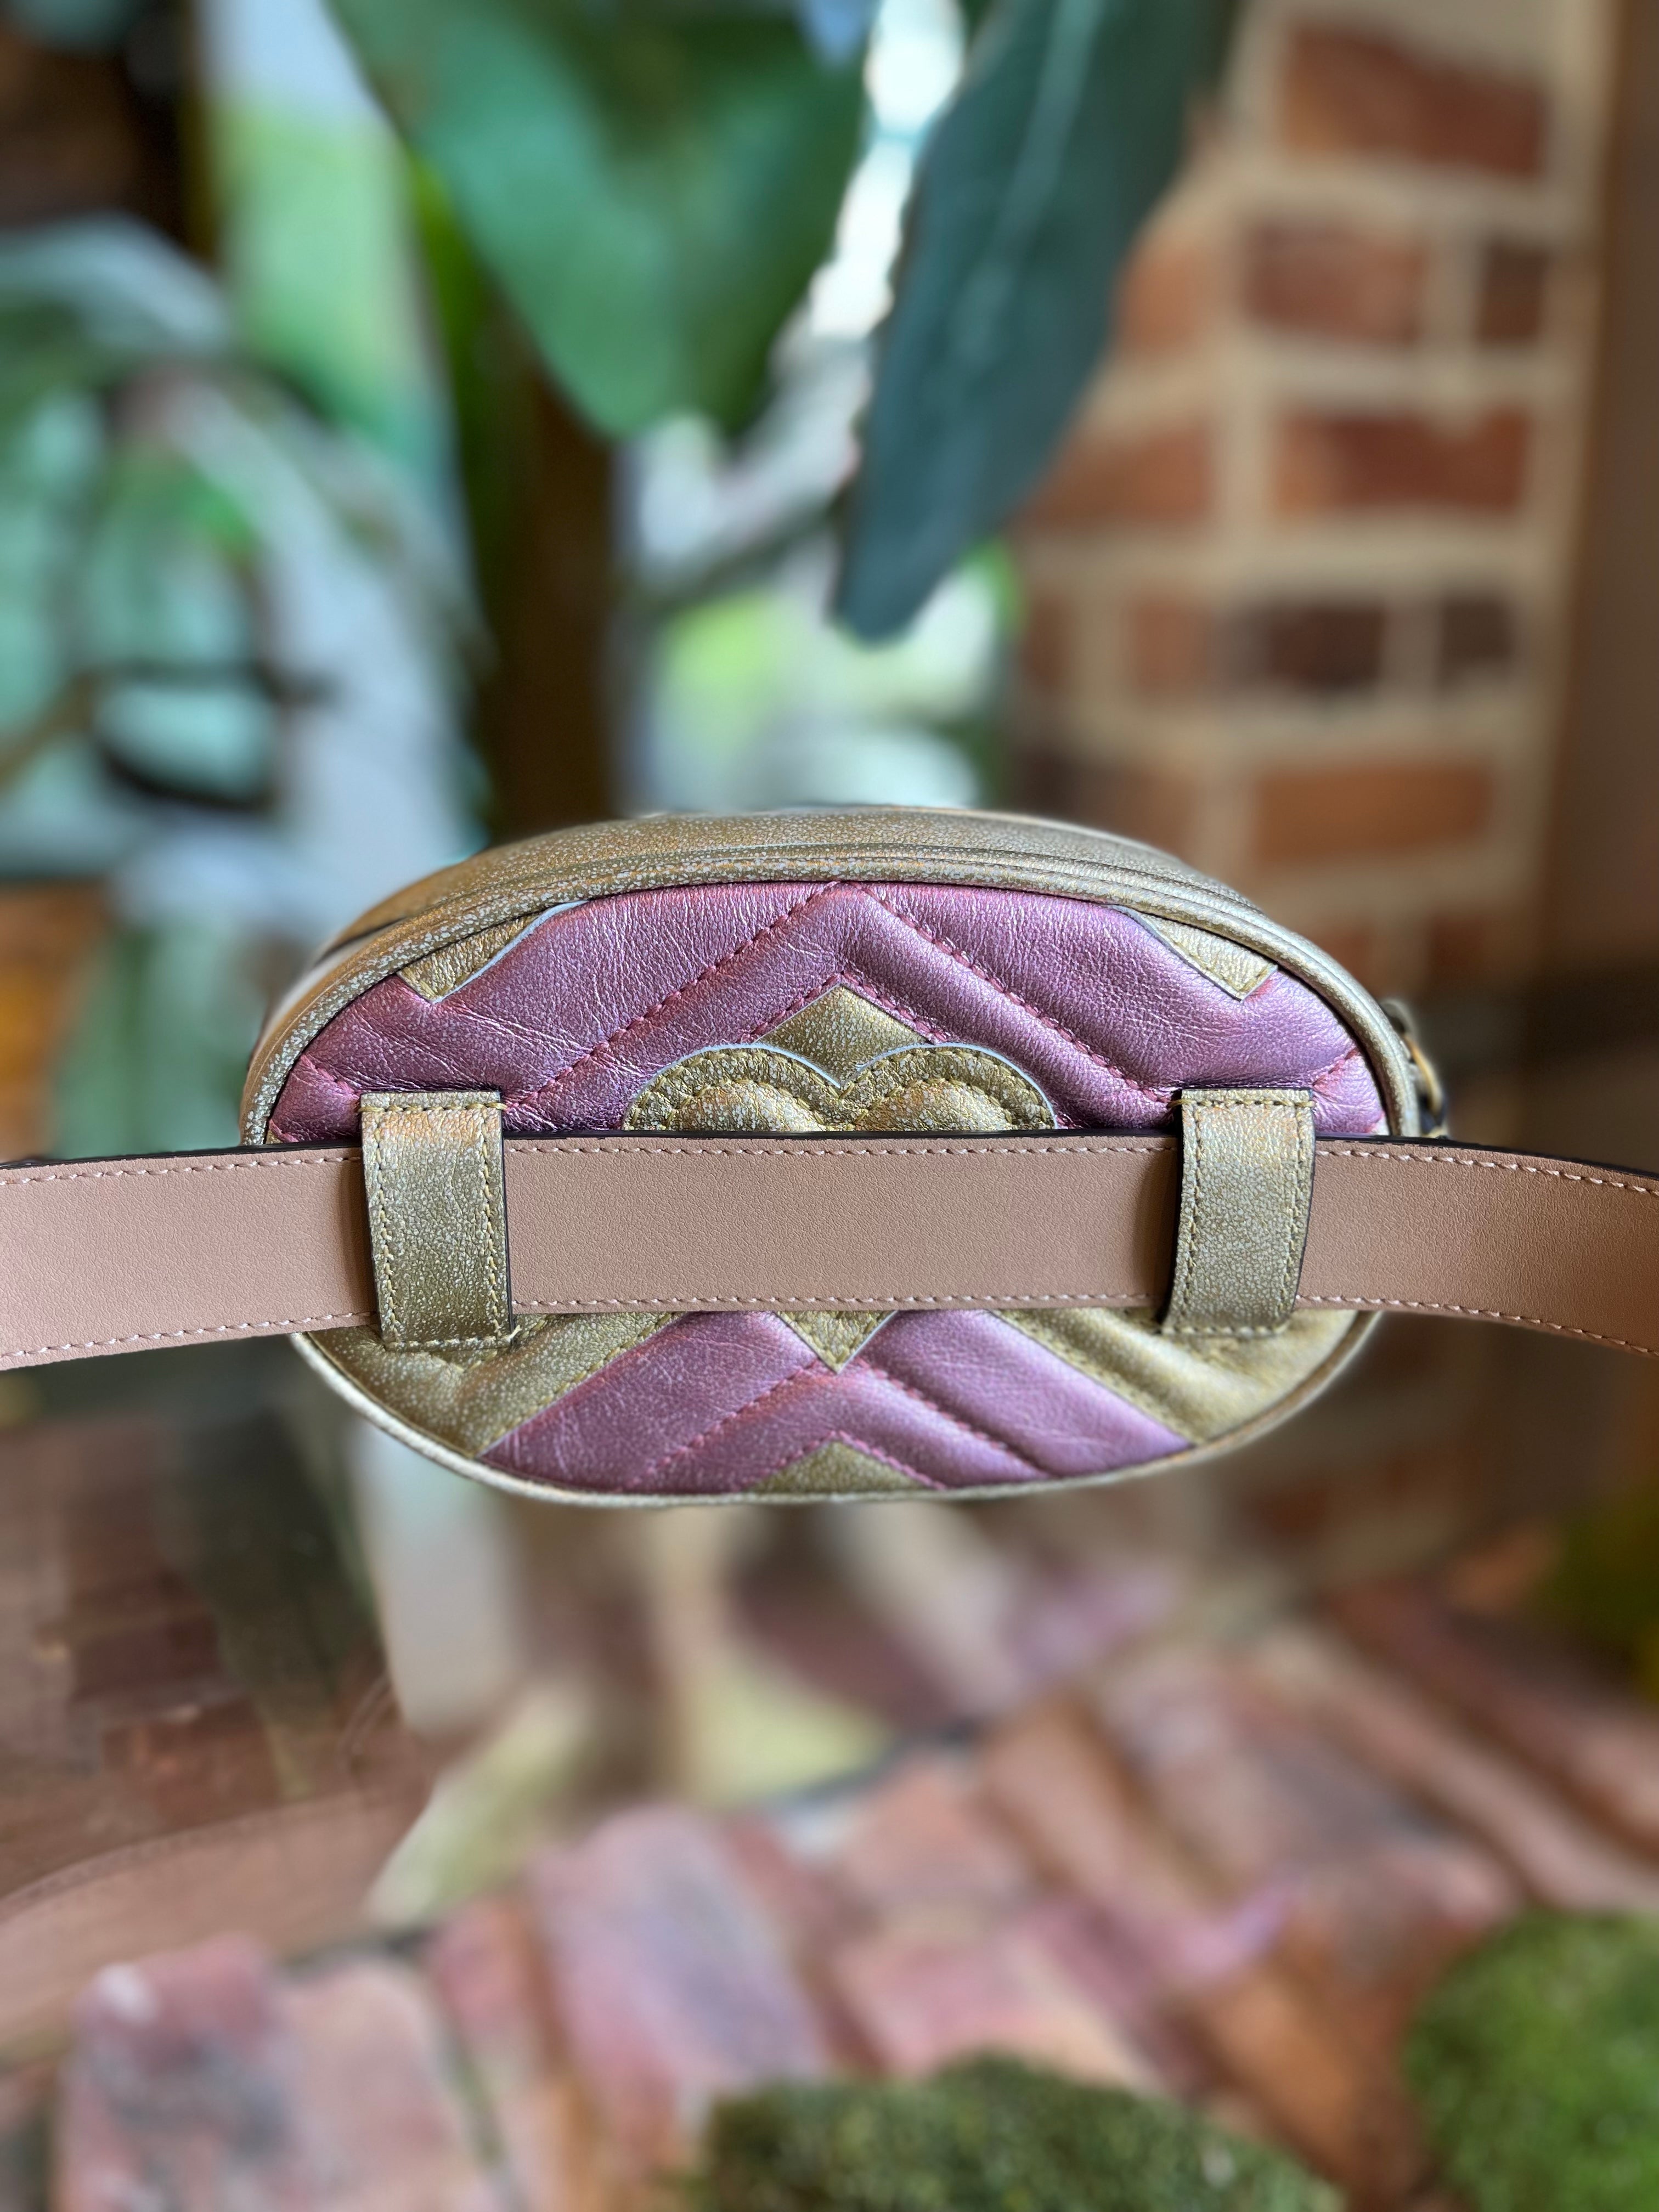 Gucci GG Marmont Belt Bag Matelasse Dusty Pink in Calfskin with Antique  Gold - US